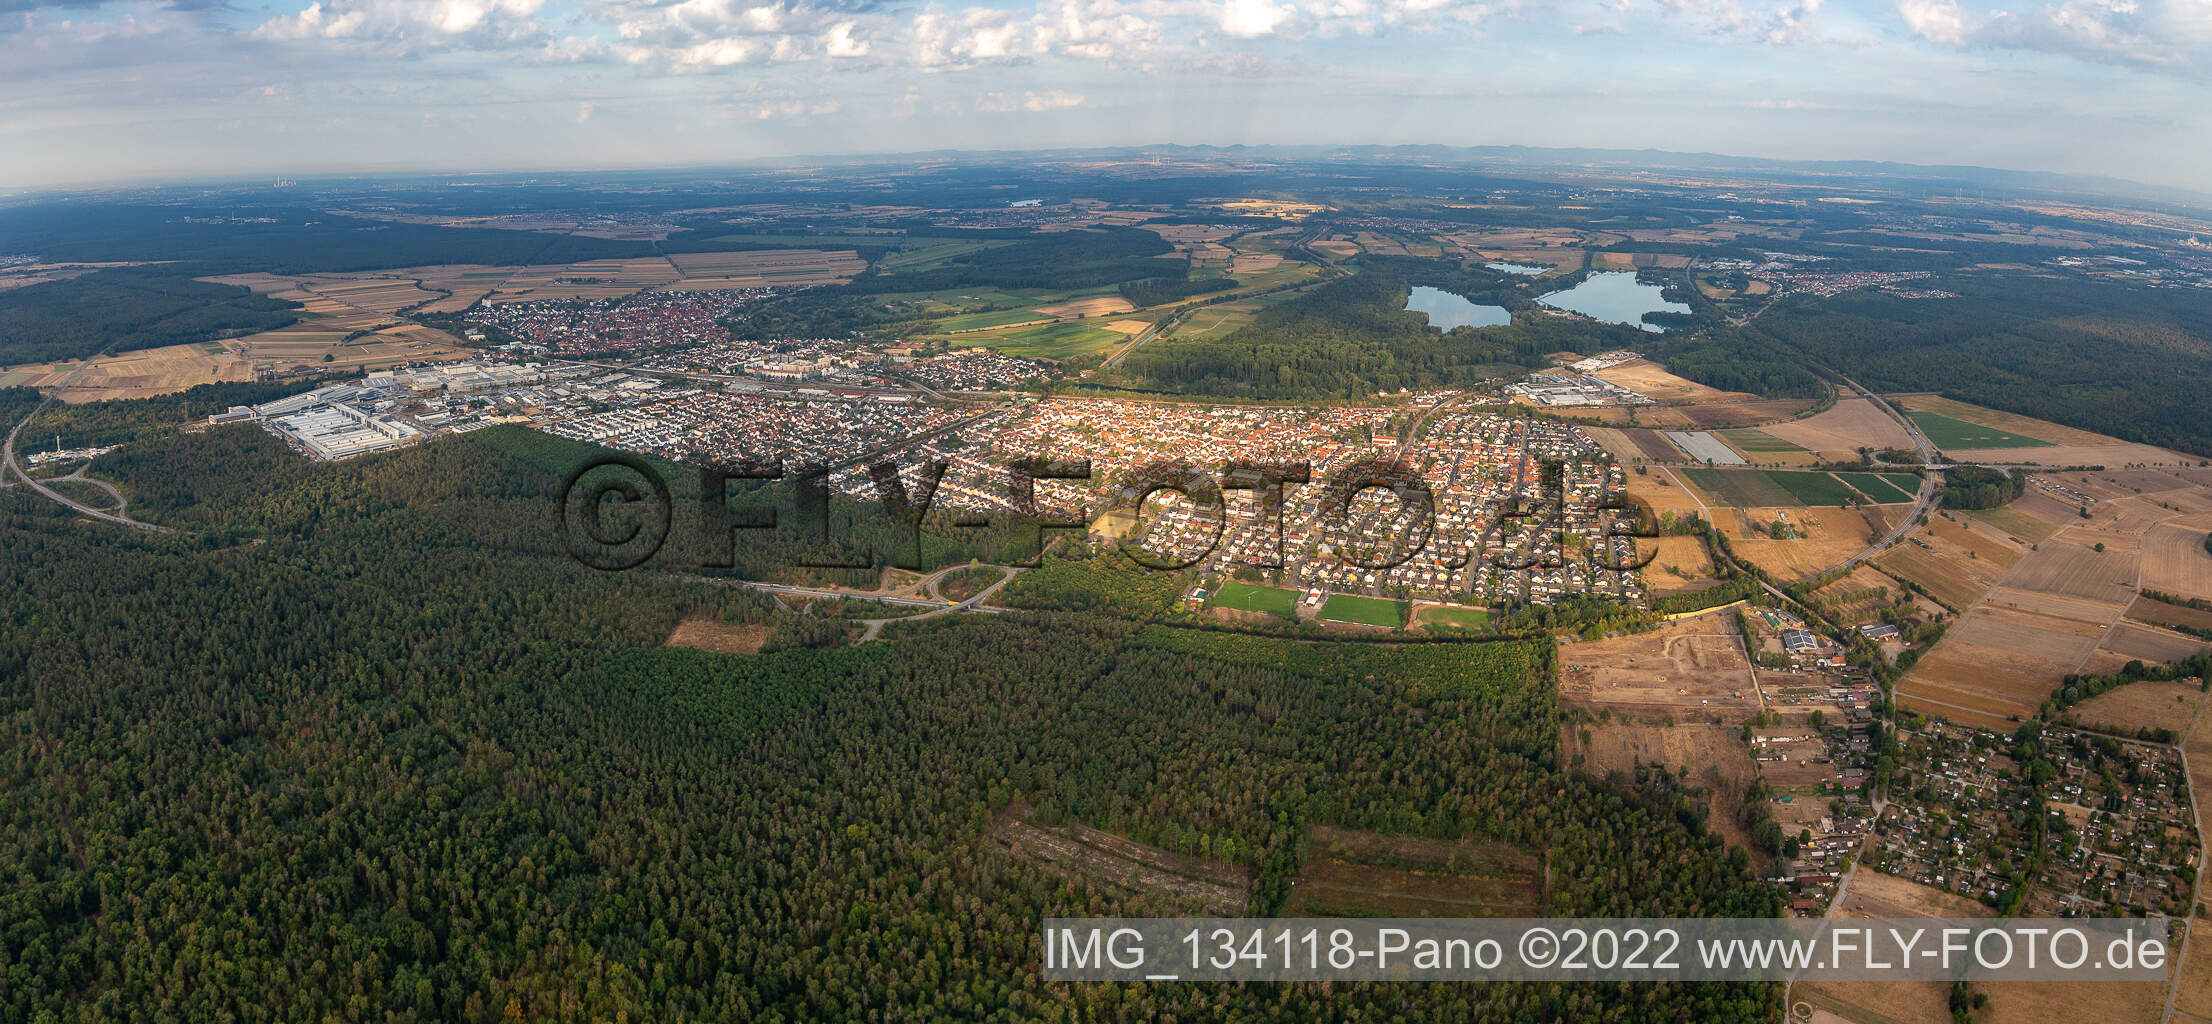 District Neudorf in Graben-Neudorf in the state Baden-Wuerttemberg, Germany viewn from the air